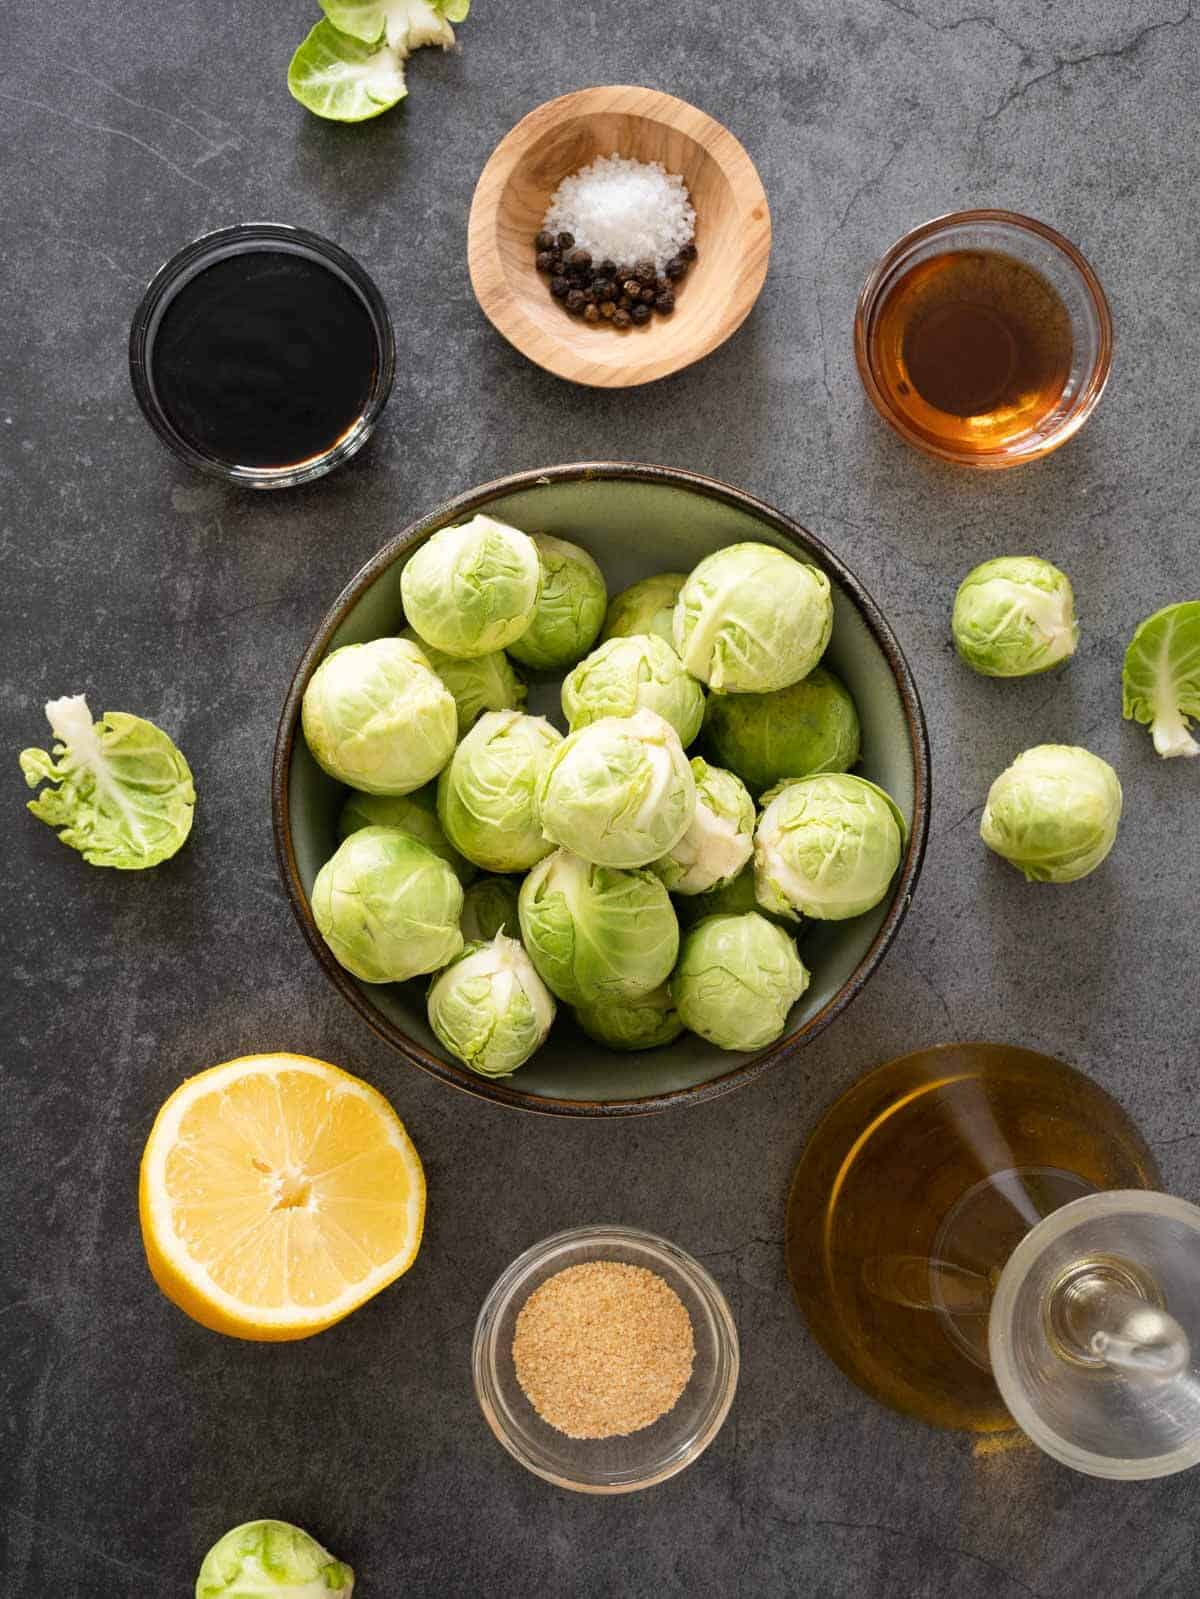 ingredients to make roasted balsamic lemon marinated Brussels spouts.